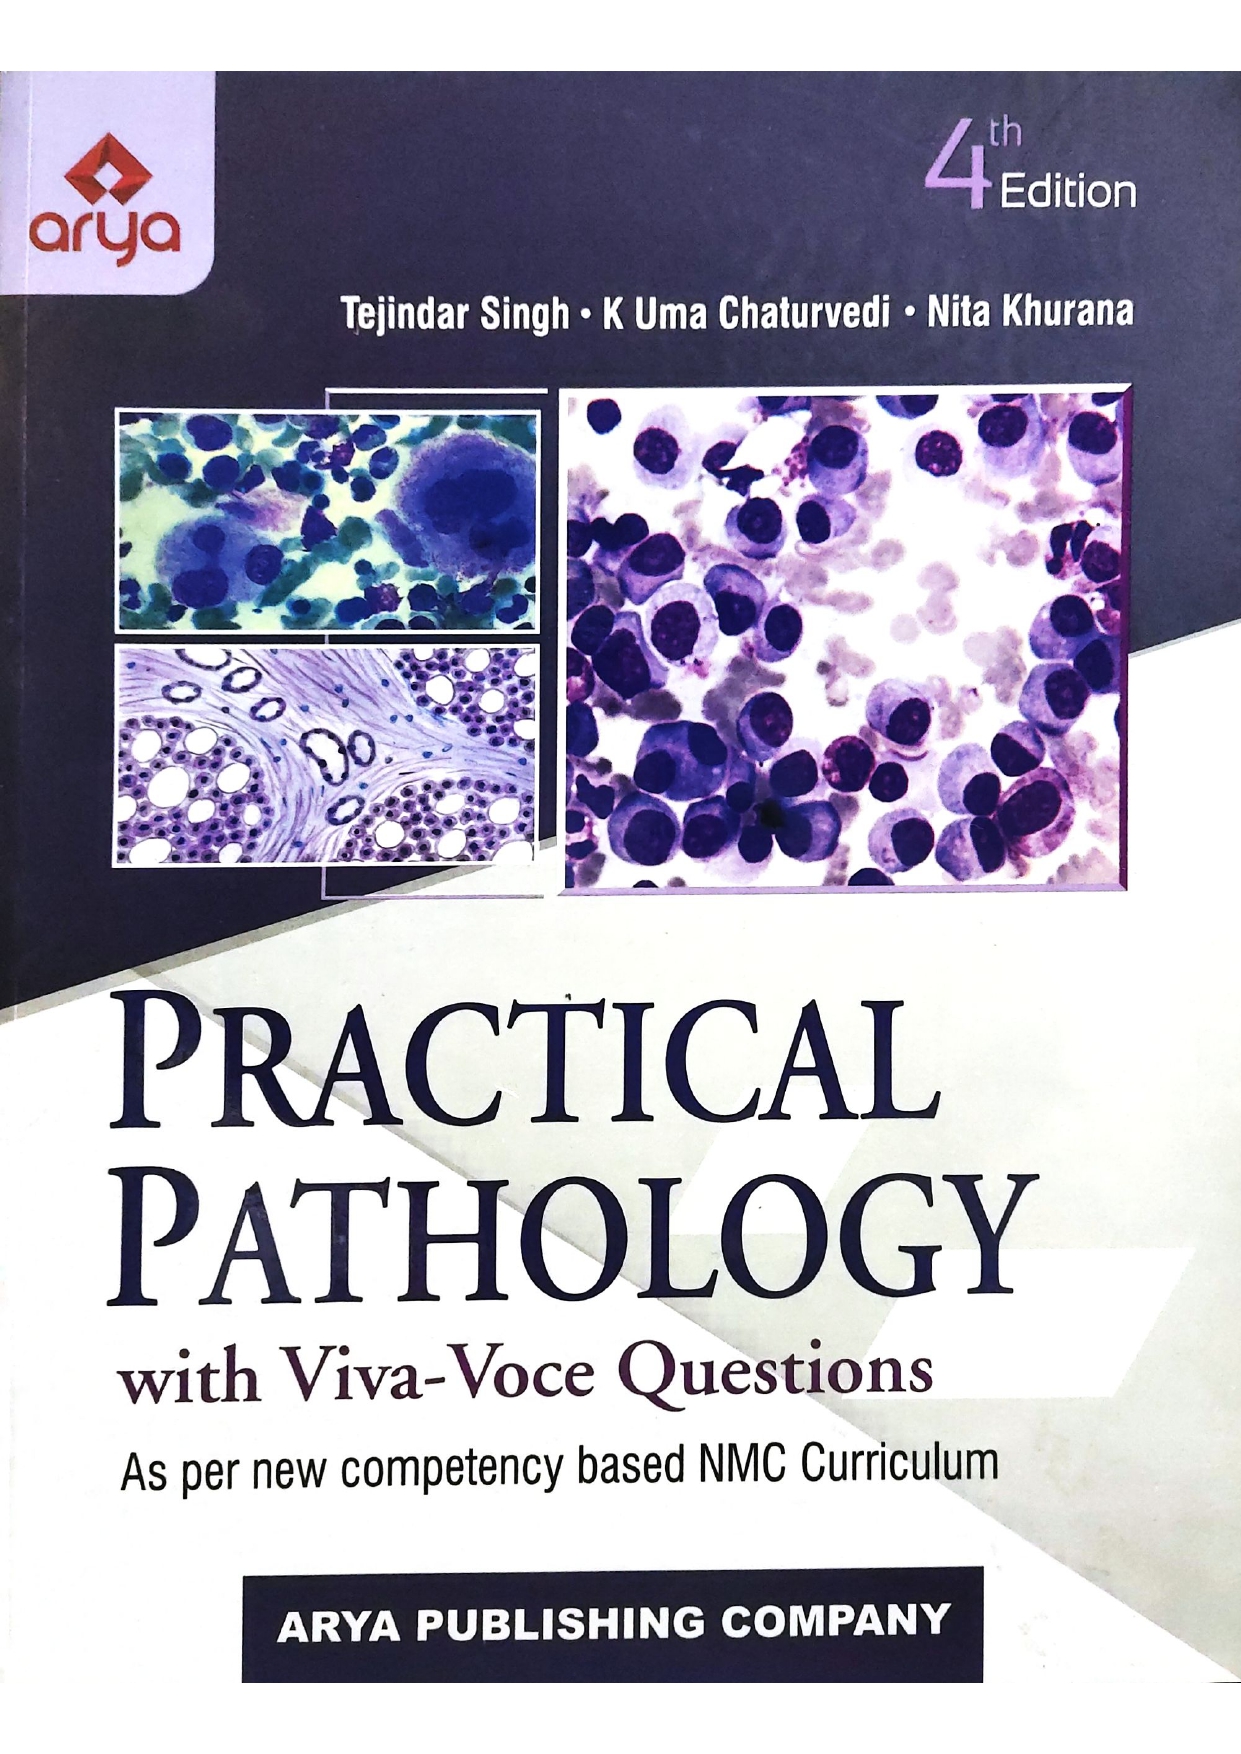 Practical Pathology With Viva-Voce Questions